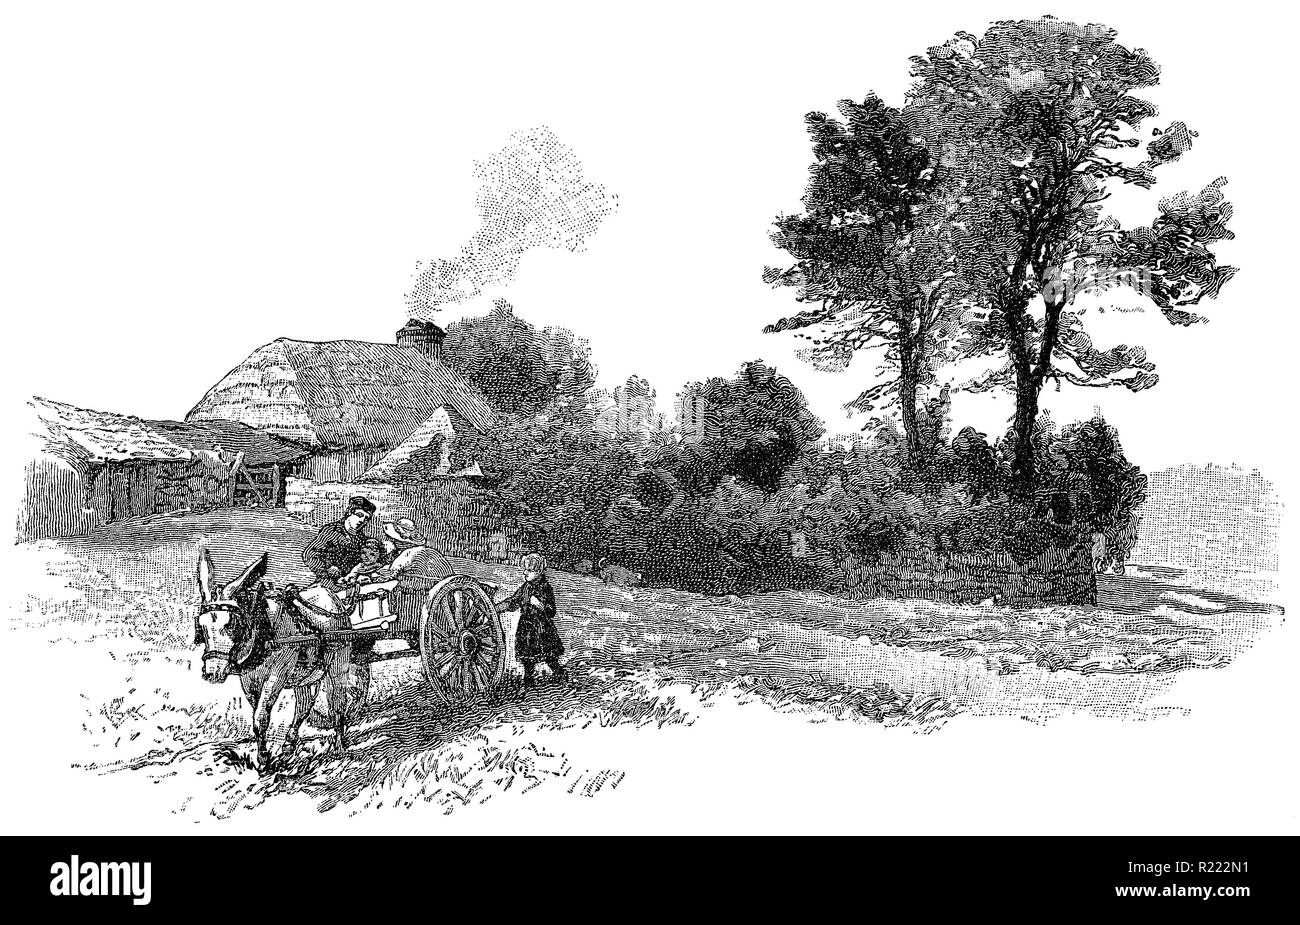 https://c8.alamy.com/comp/R222N1/1884-vintage-engraving-of-a-cottage-on-dartmoor-from-a-drawing-by-lr-obrien-R222N1.jpg